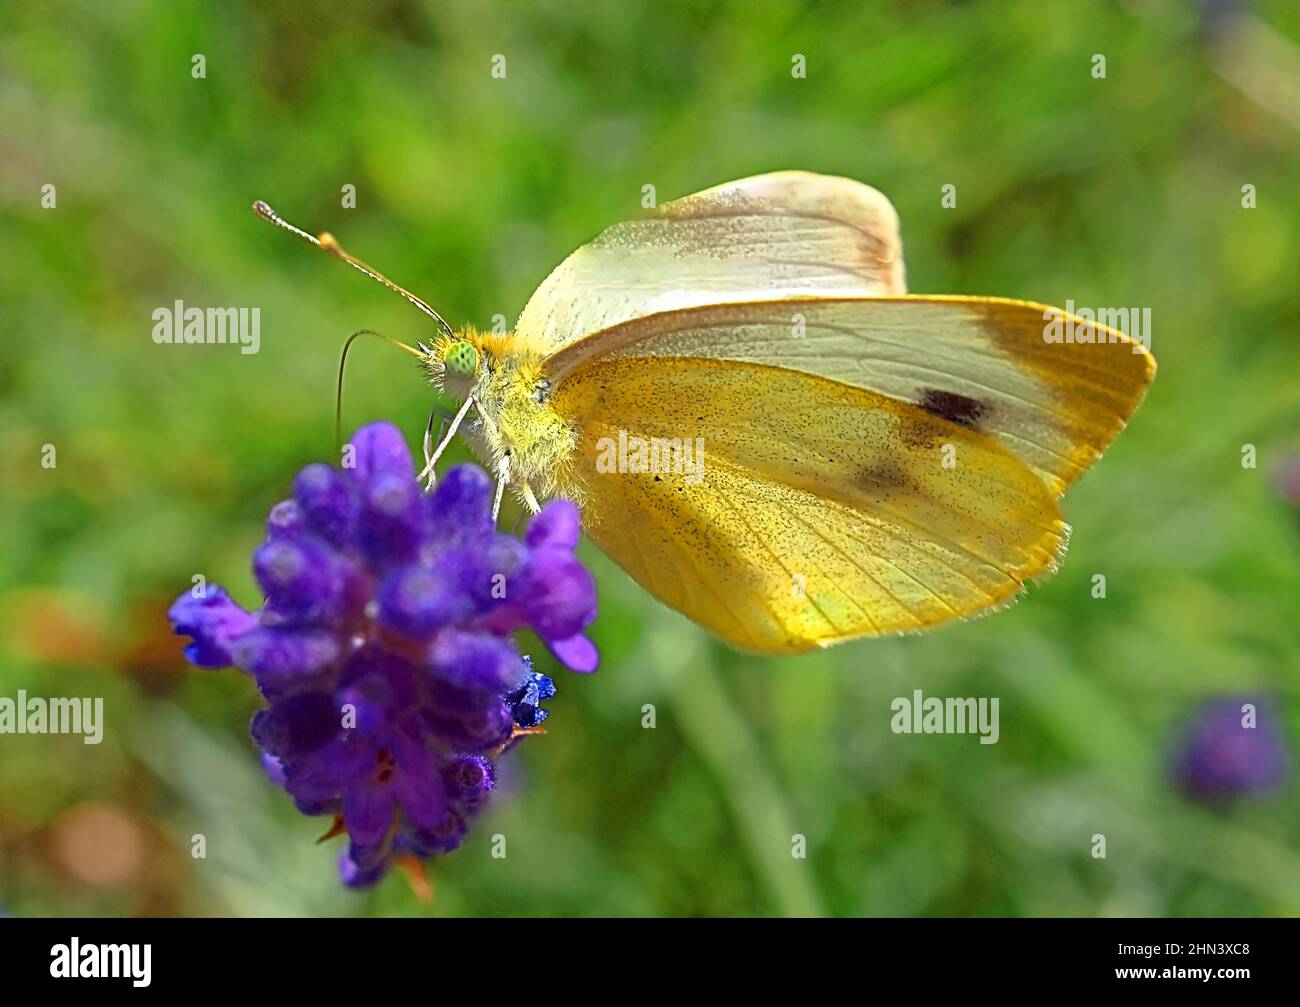 Closeup of a yellow butterfly with green eyes Stock Photo